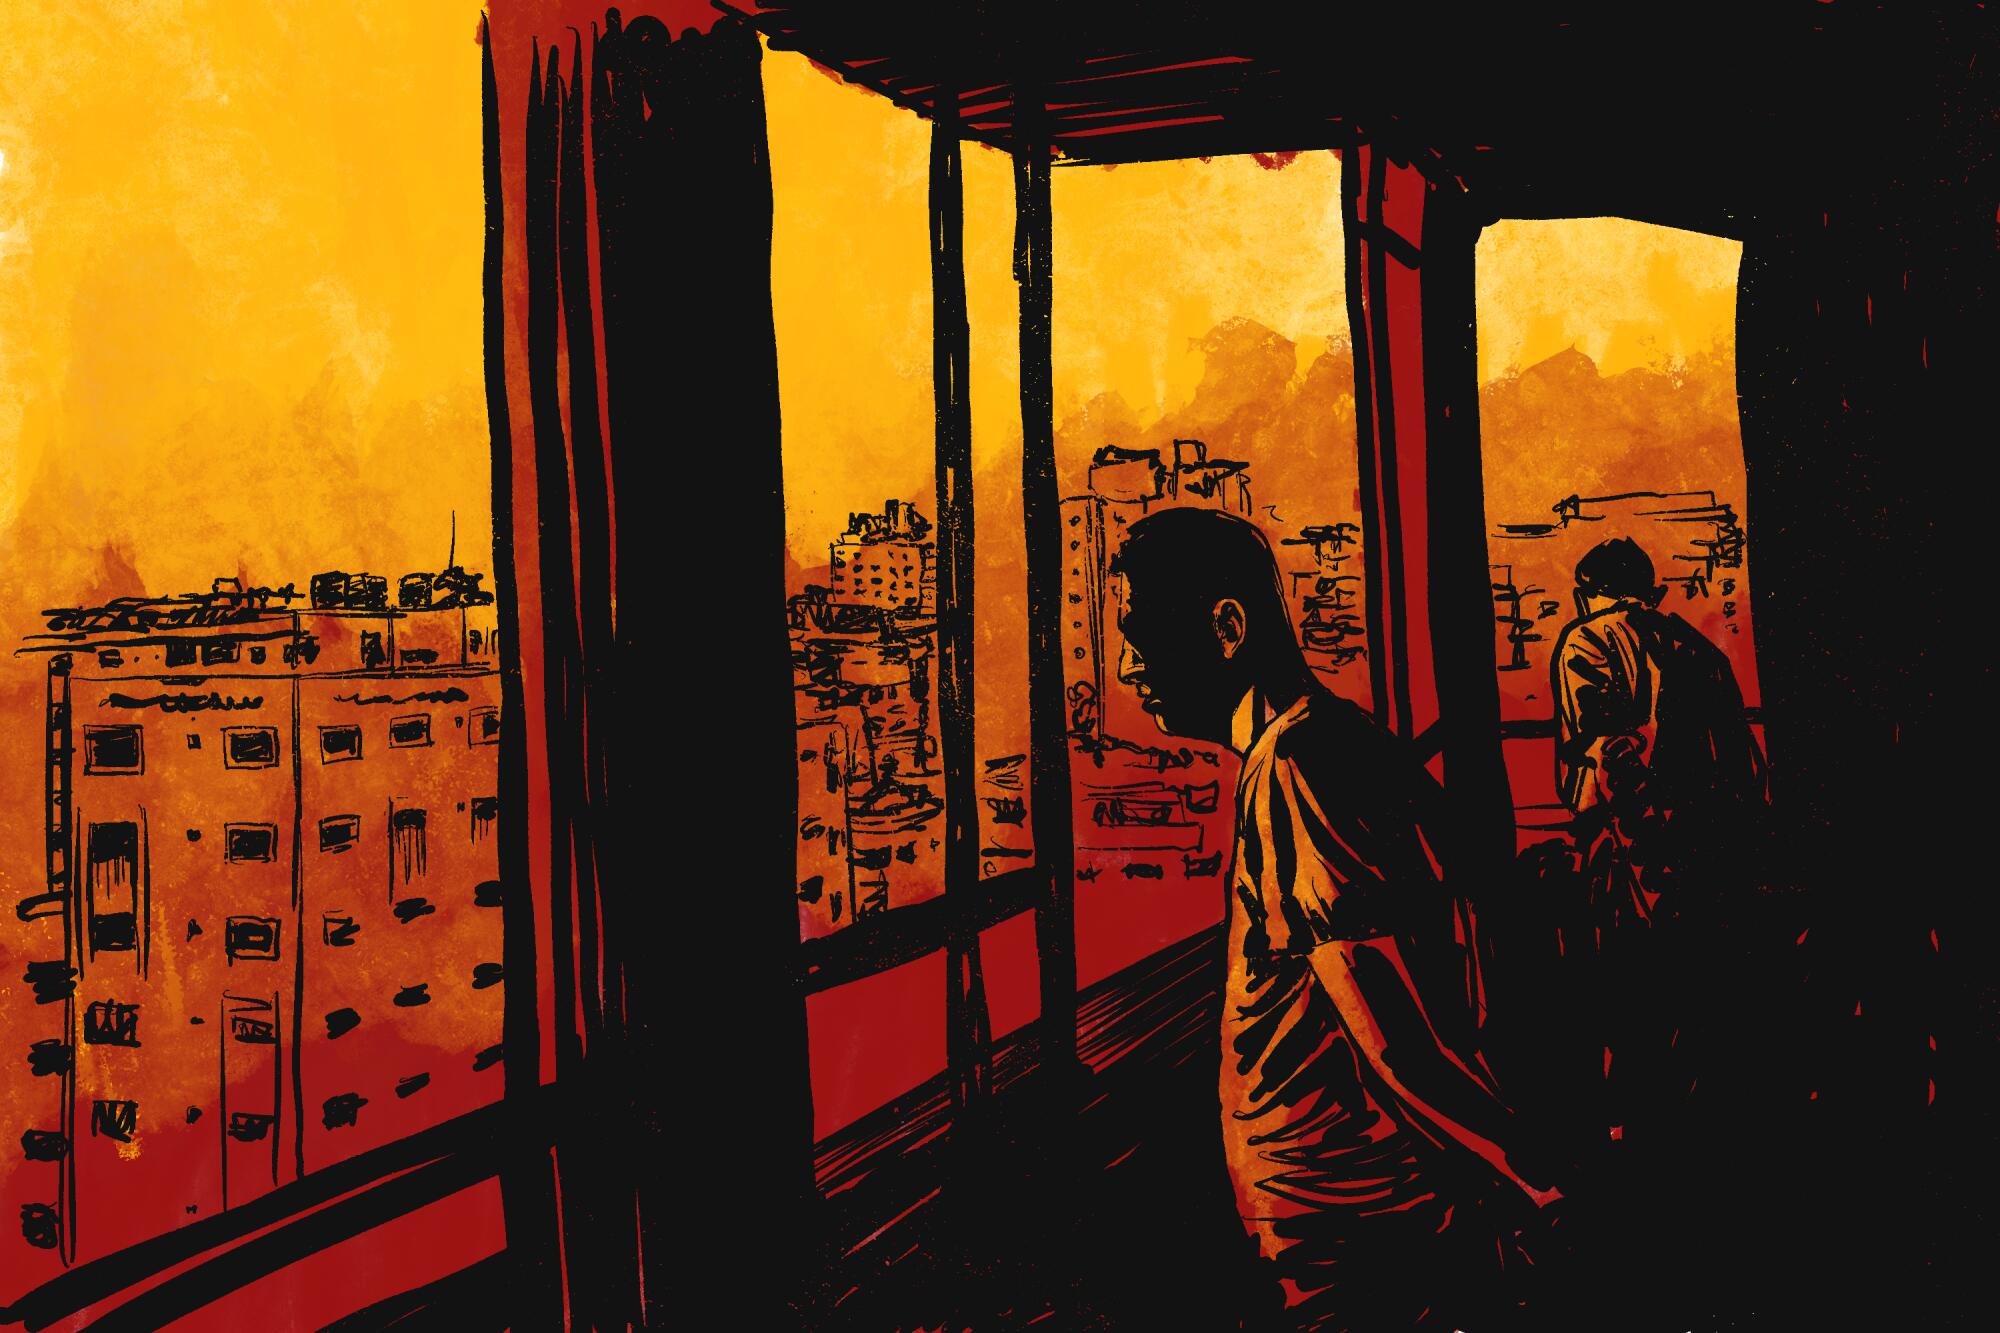 An illustration of two men looking out a building's windows at other buildings surrounded in red and orange